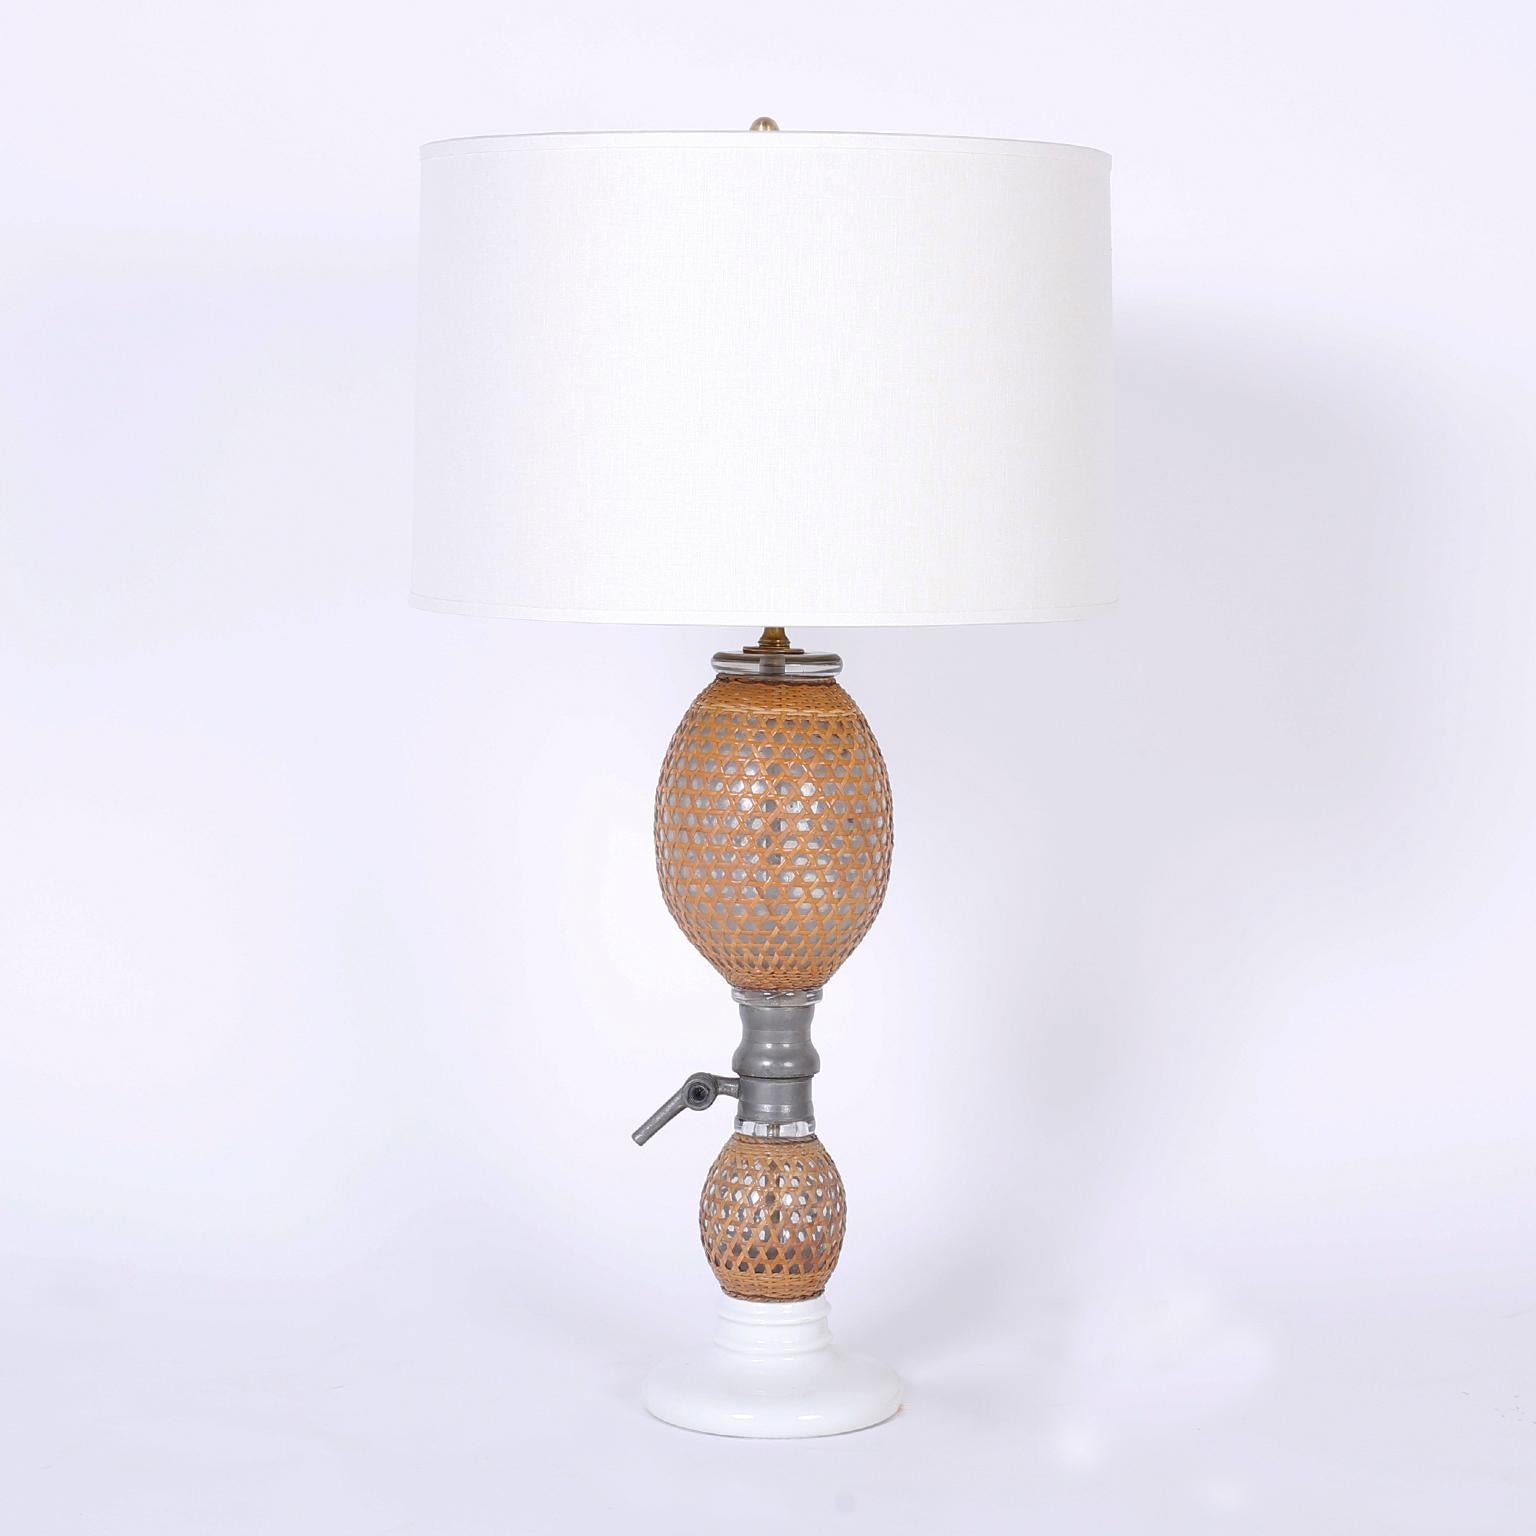 Pair of antique French bottles with serving spouts now serving as table lamps composed of hand blown glass wrapped in wicker with pewter hardware and white porcelain bases.